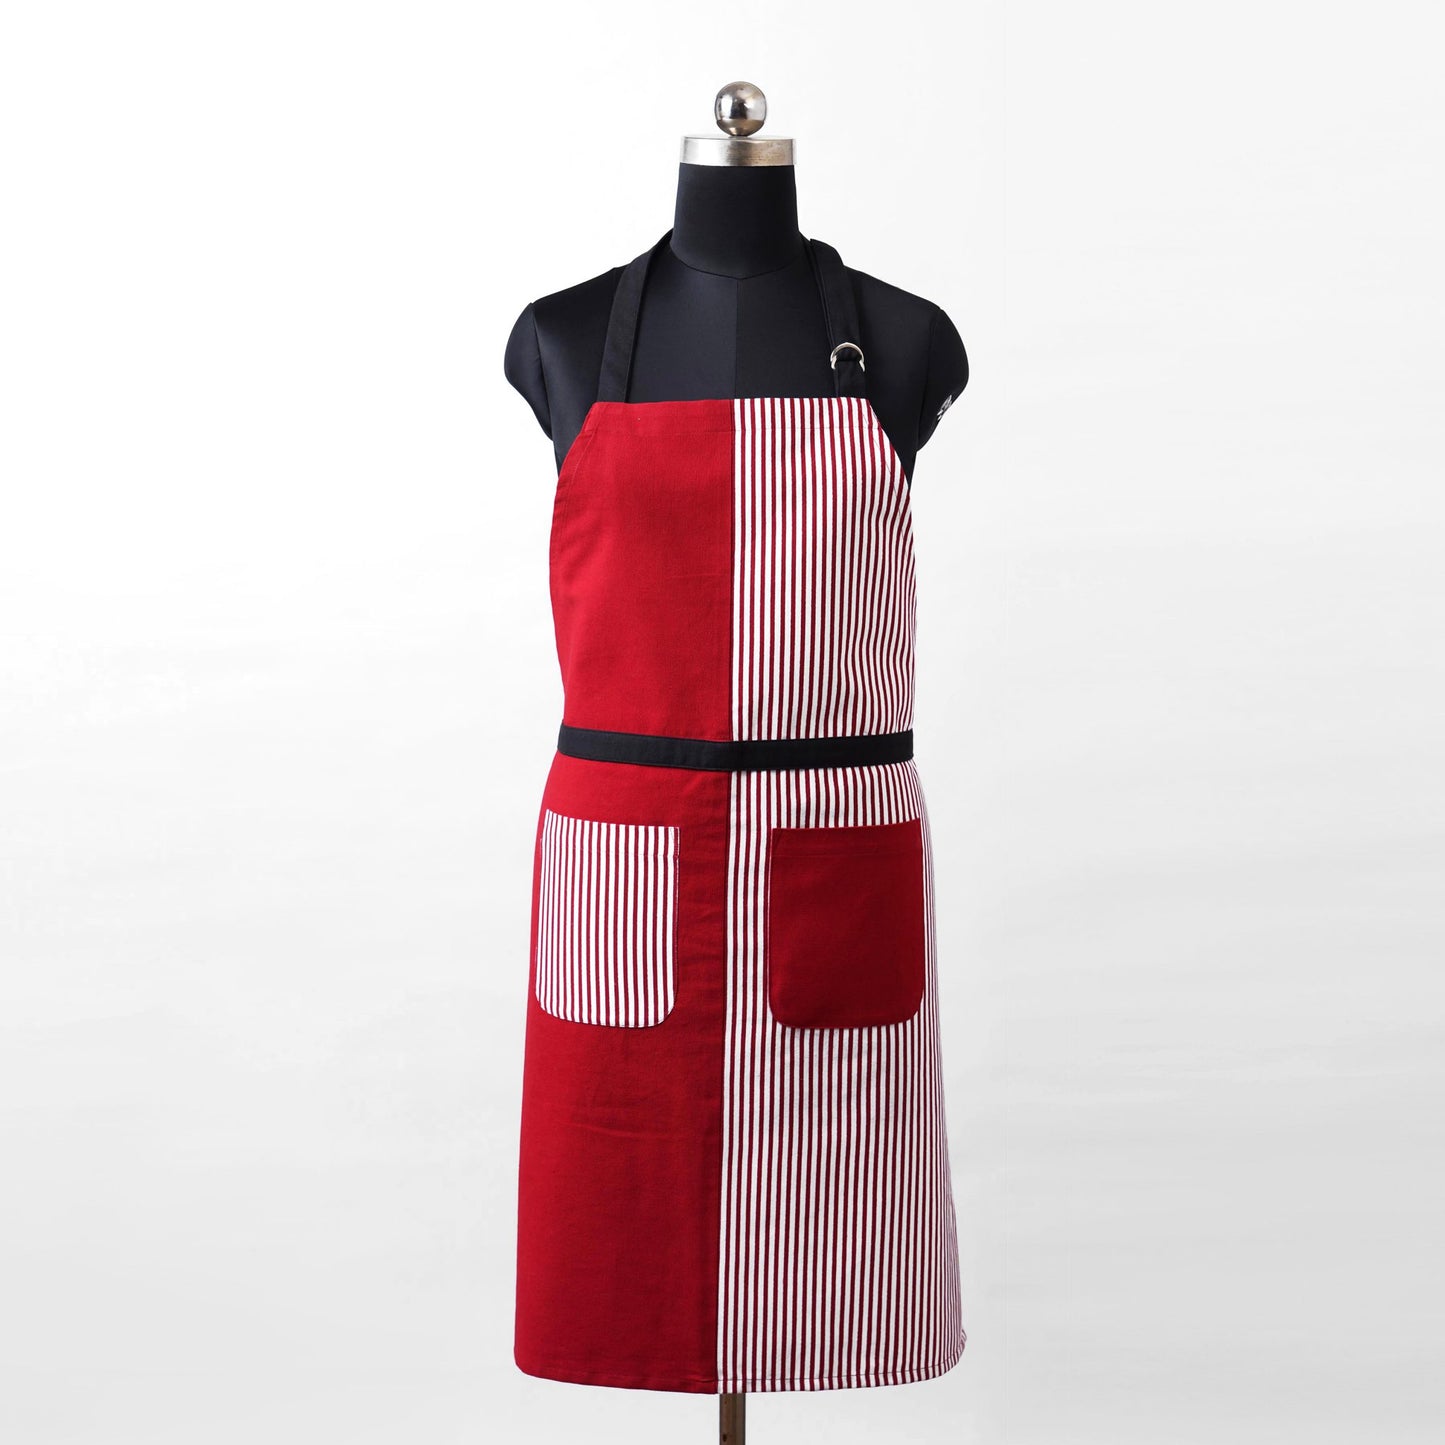 Christmas apron, Red and stripe panel, kitchen accessory, size 27"X 35"